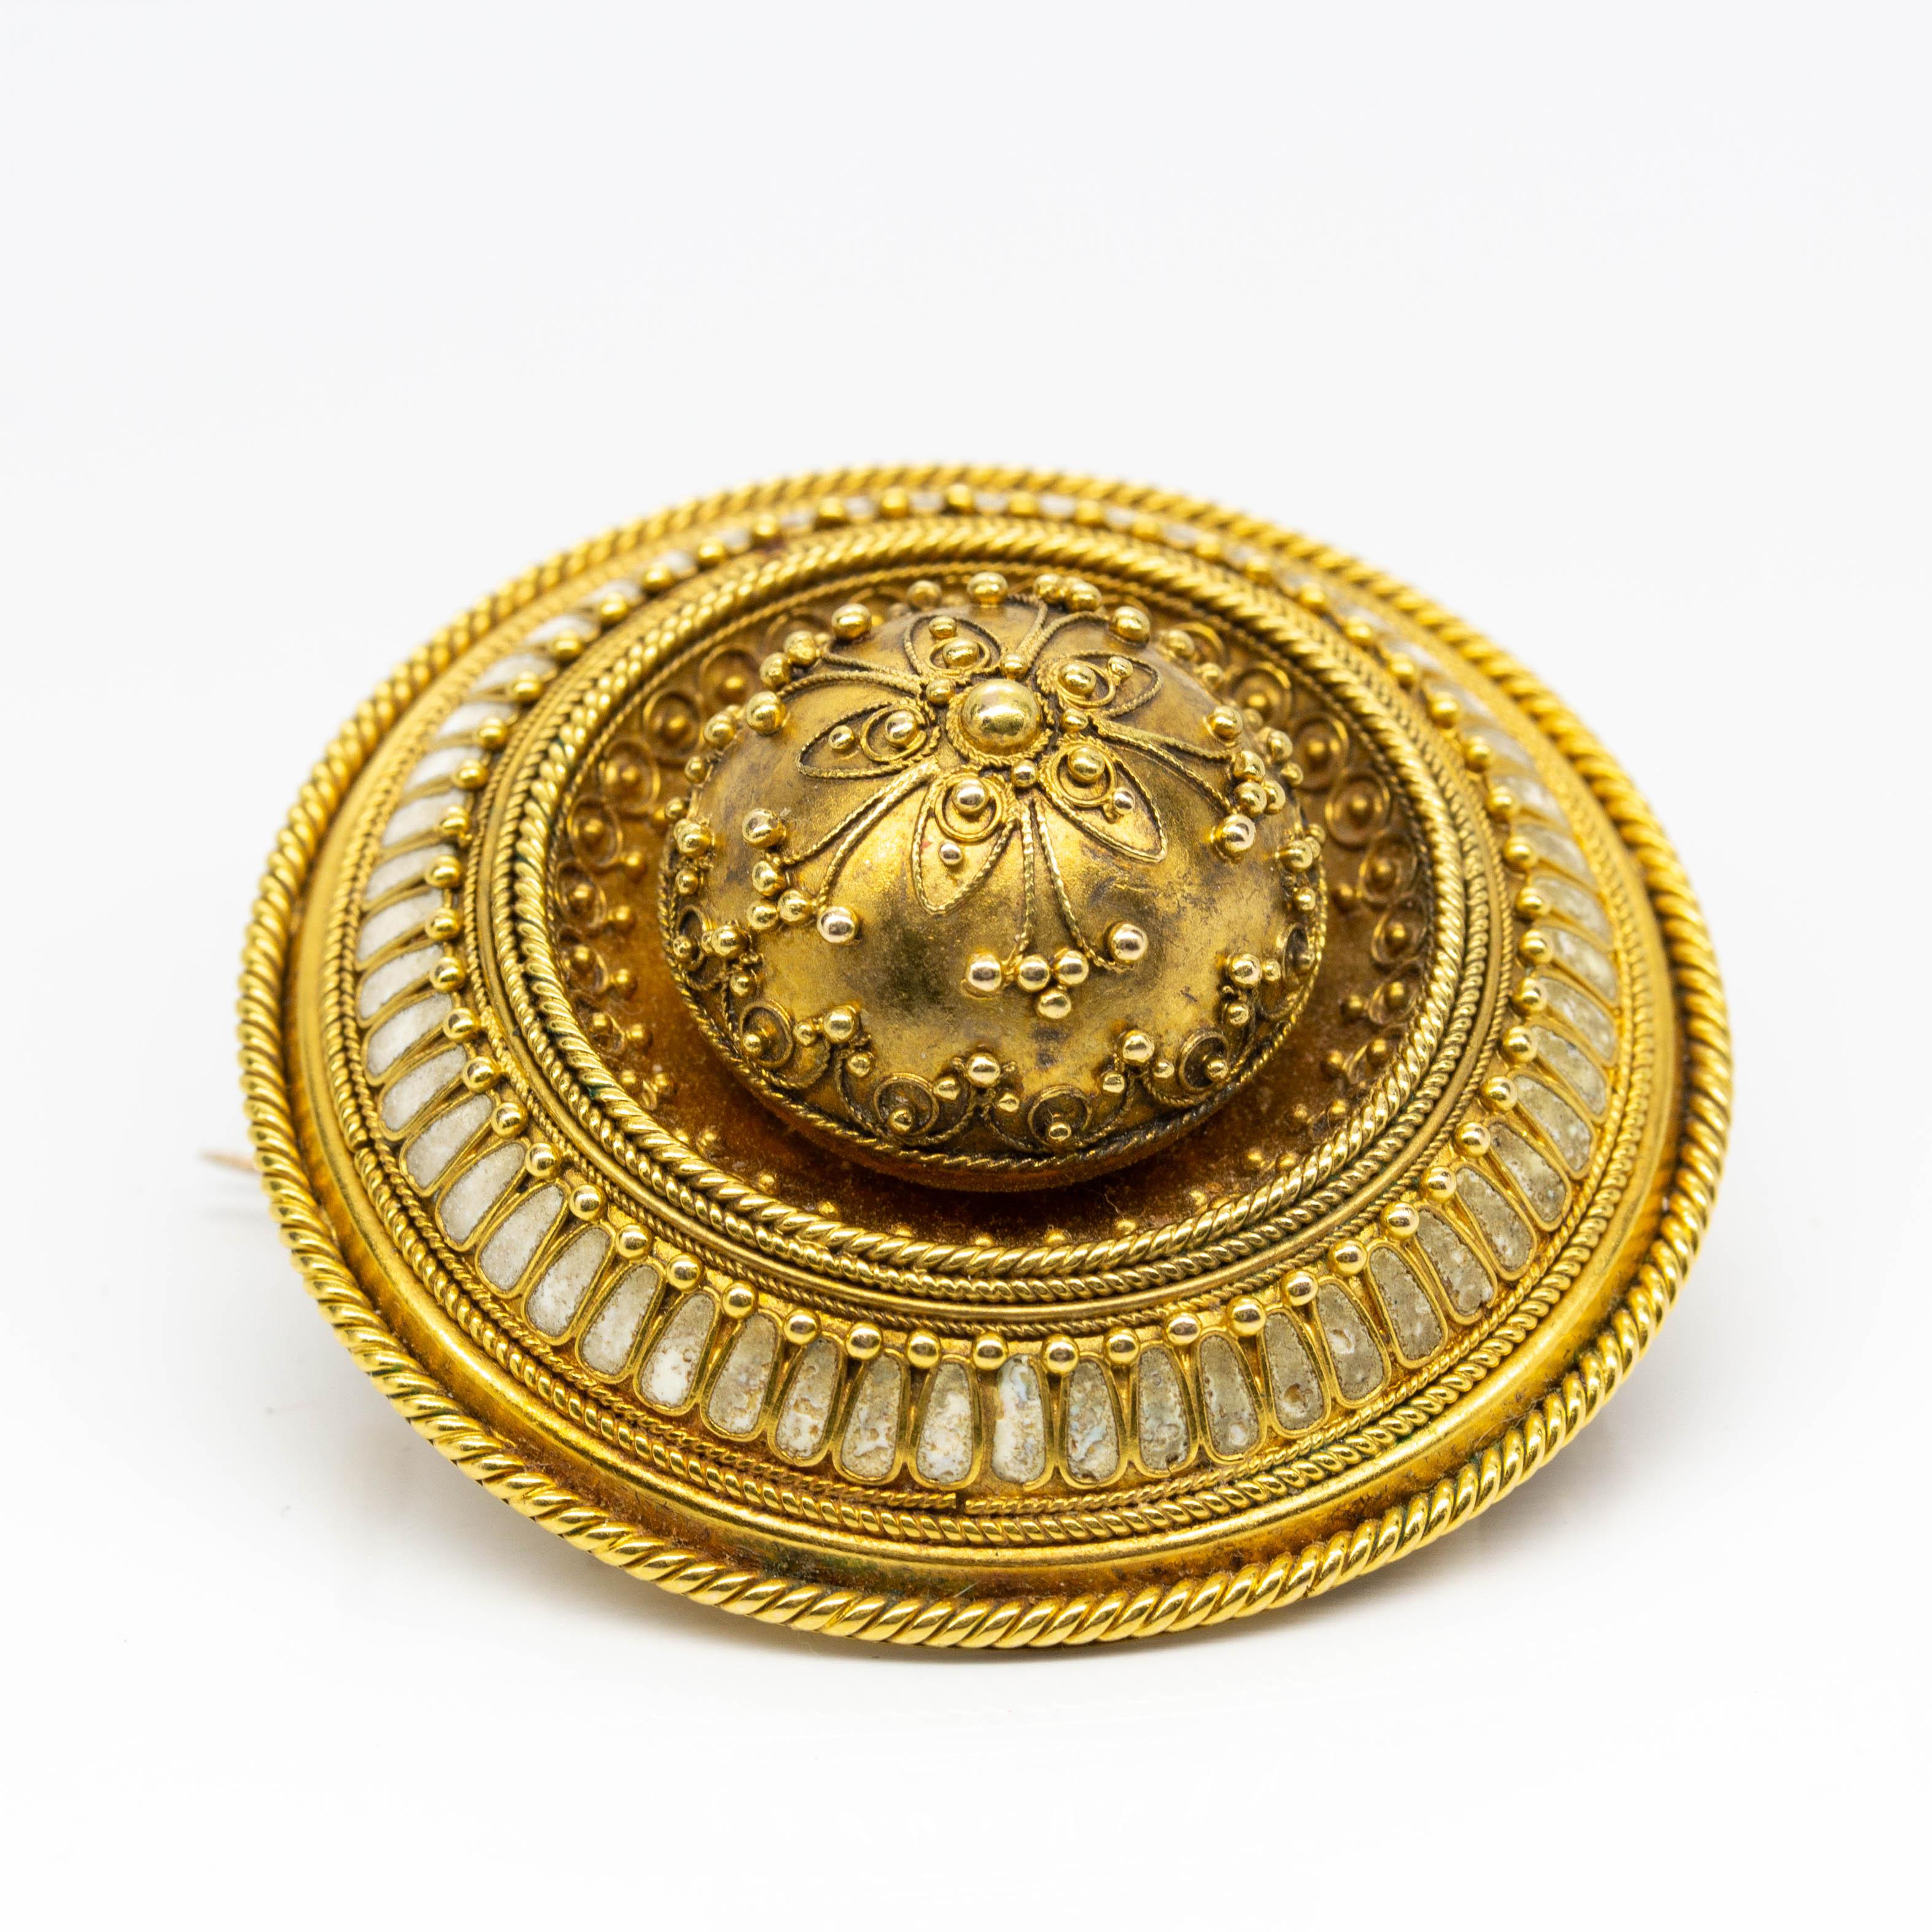 •	Early Victorian
•	18k gold
•	A brooch with white enamel measuring 38mm by 16 mm
•	A pair of earrings measuring 53mm by 13mm by 10mm
•	Brooch weight: 17.9 grams/ 11.50 dwt 
•	Earrings weight 5.60 grs 3.60 dwt
